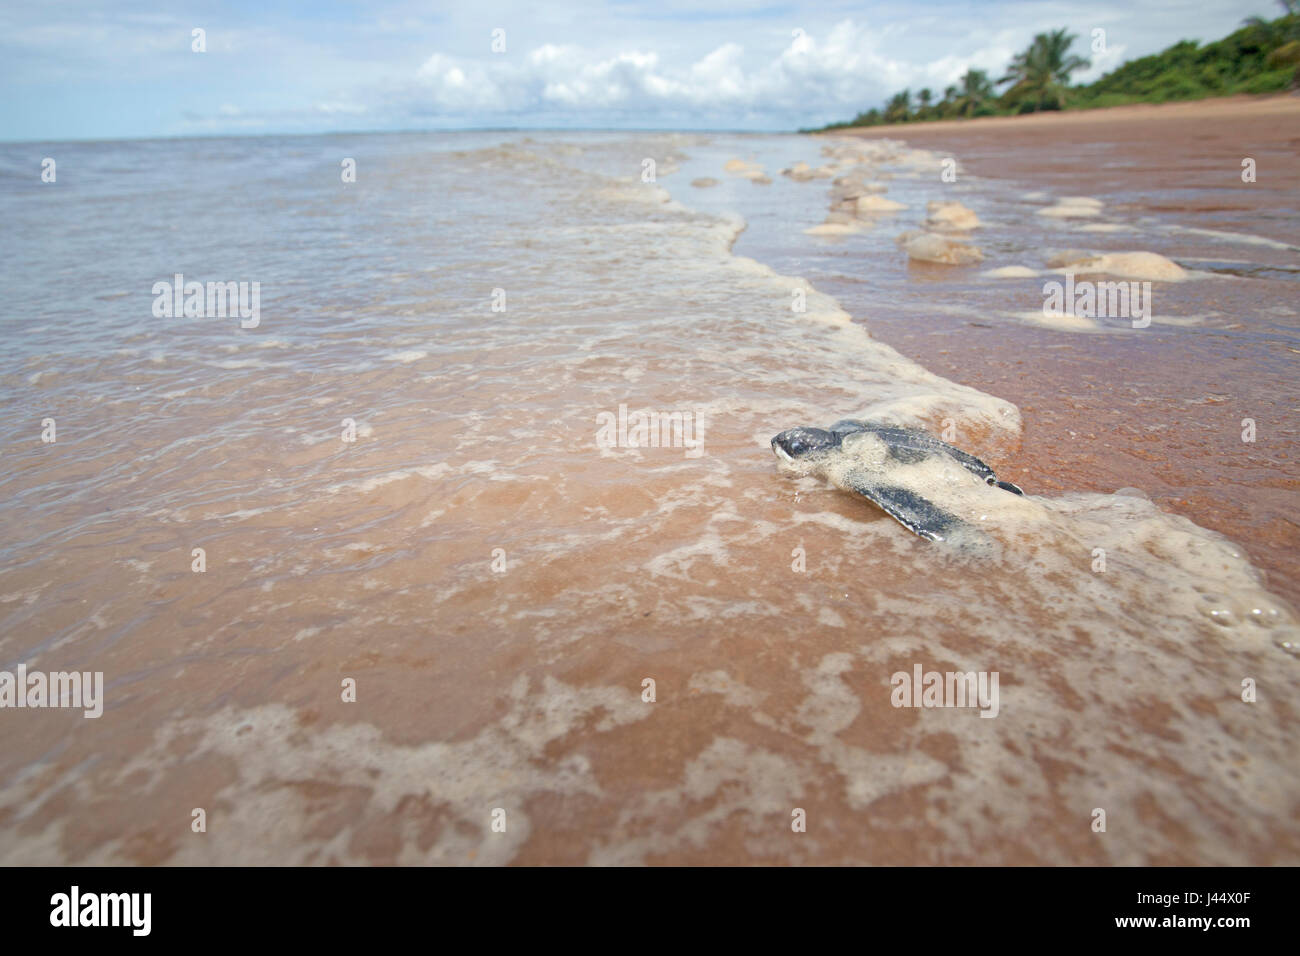 wide angle photo of a young leatherback hatchling on the beach on its way to the sea Stock Photo